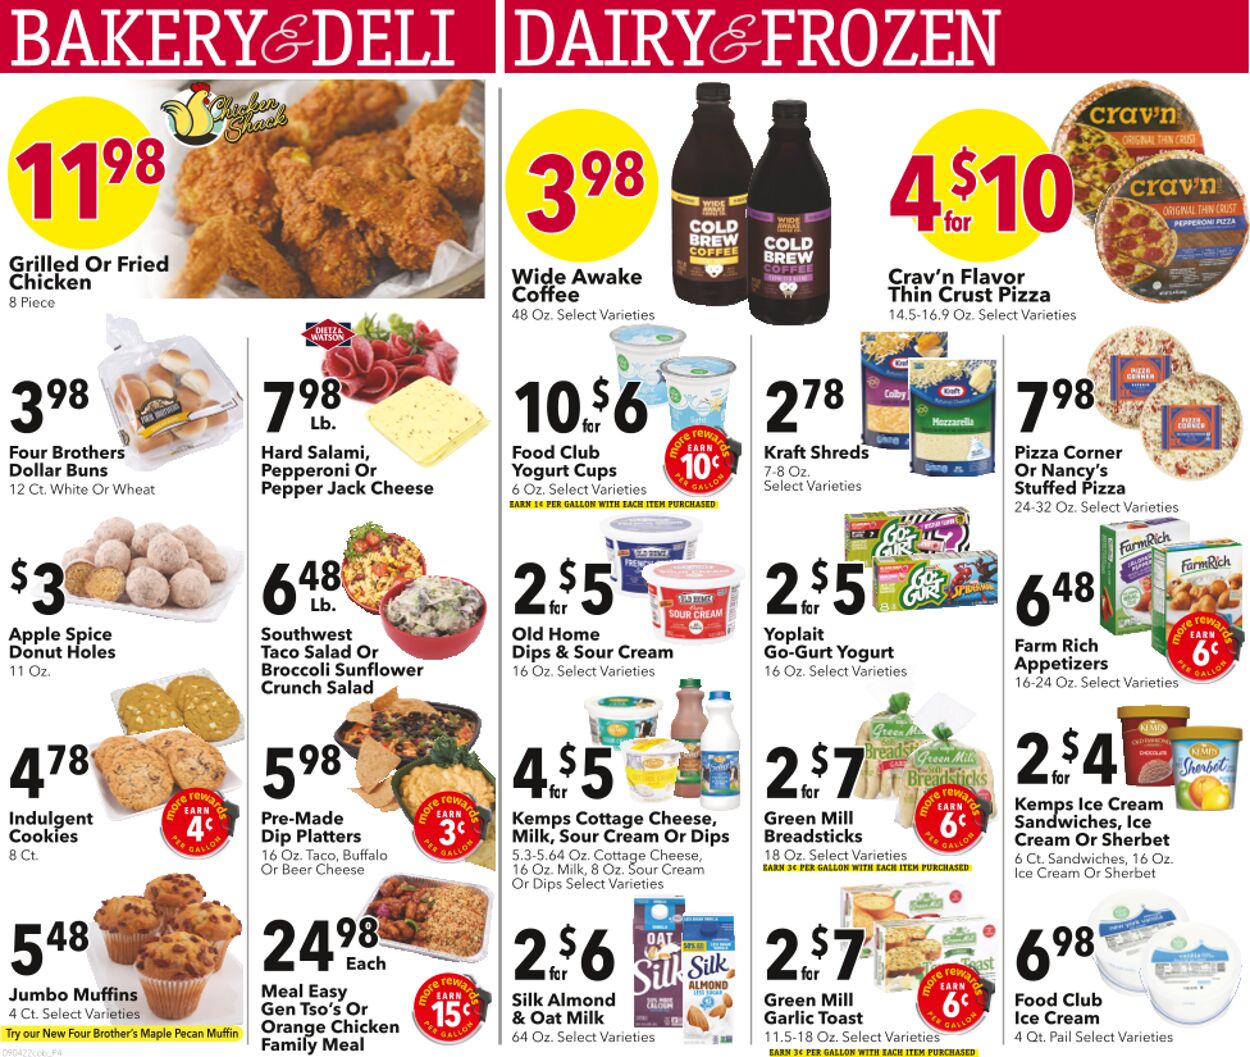 Weekly ad Coborn's 09/07/2022 - 09/13/2022